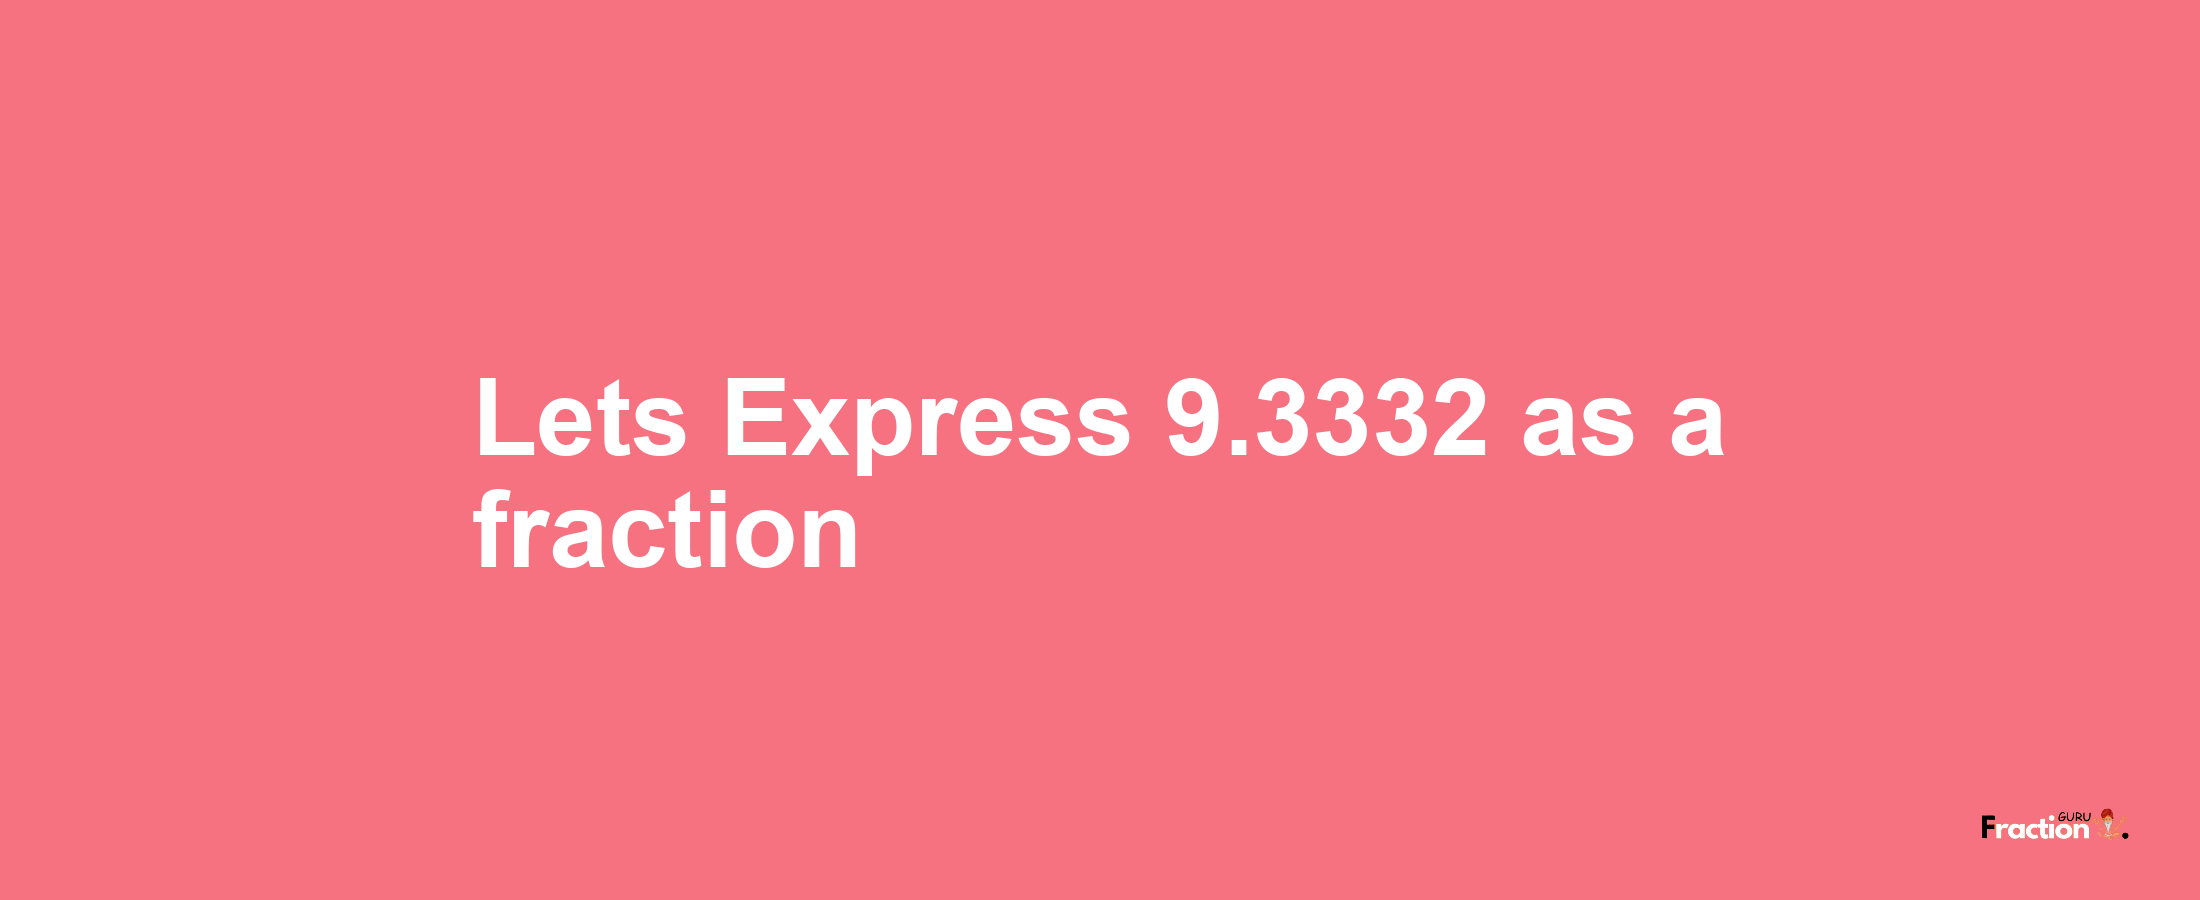 Lets Express 9.3332 as afraction